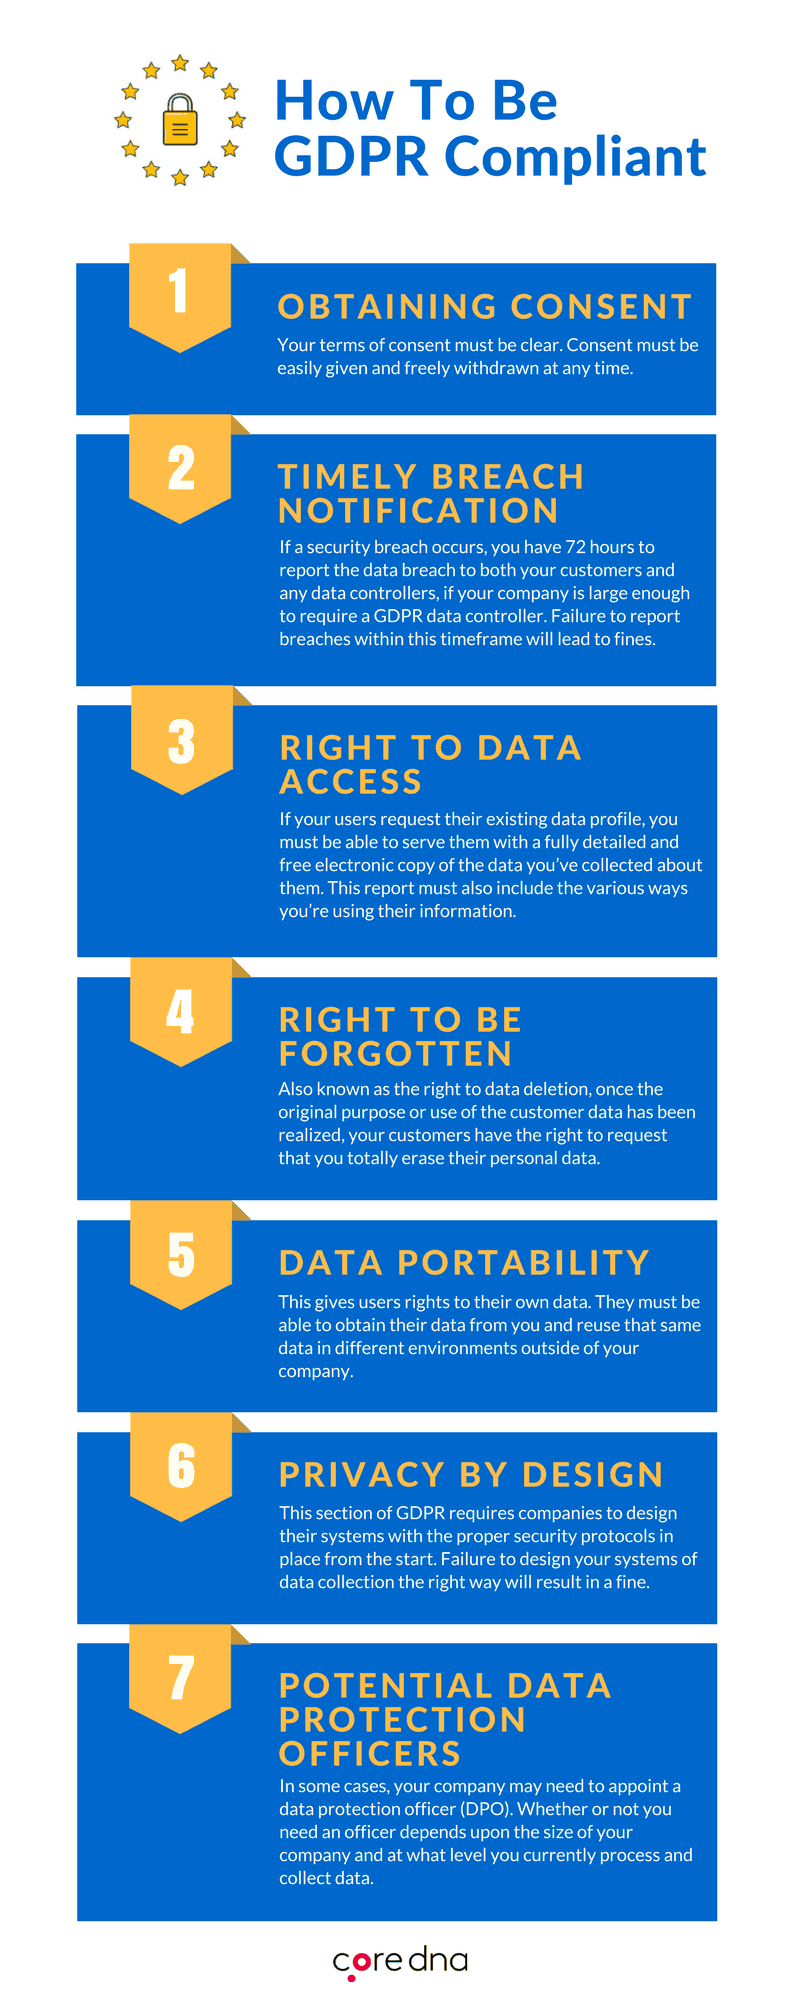 What are the 7 principles of gdpr